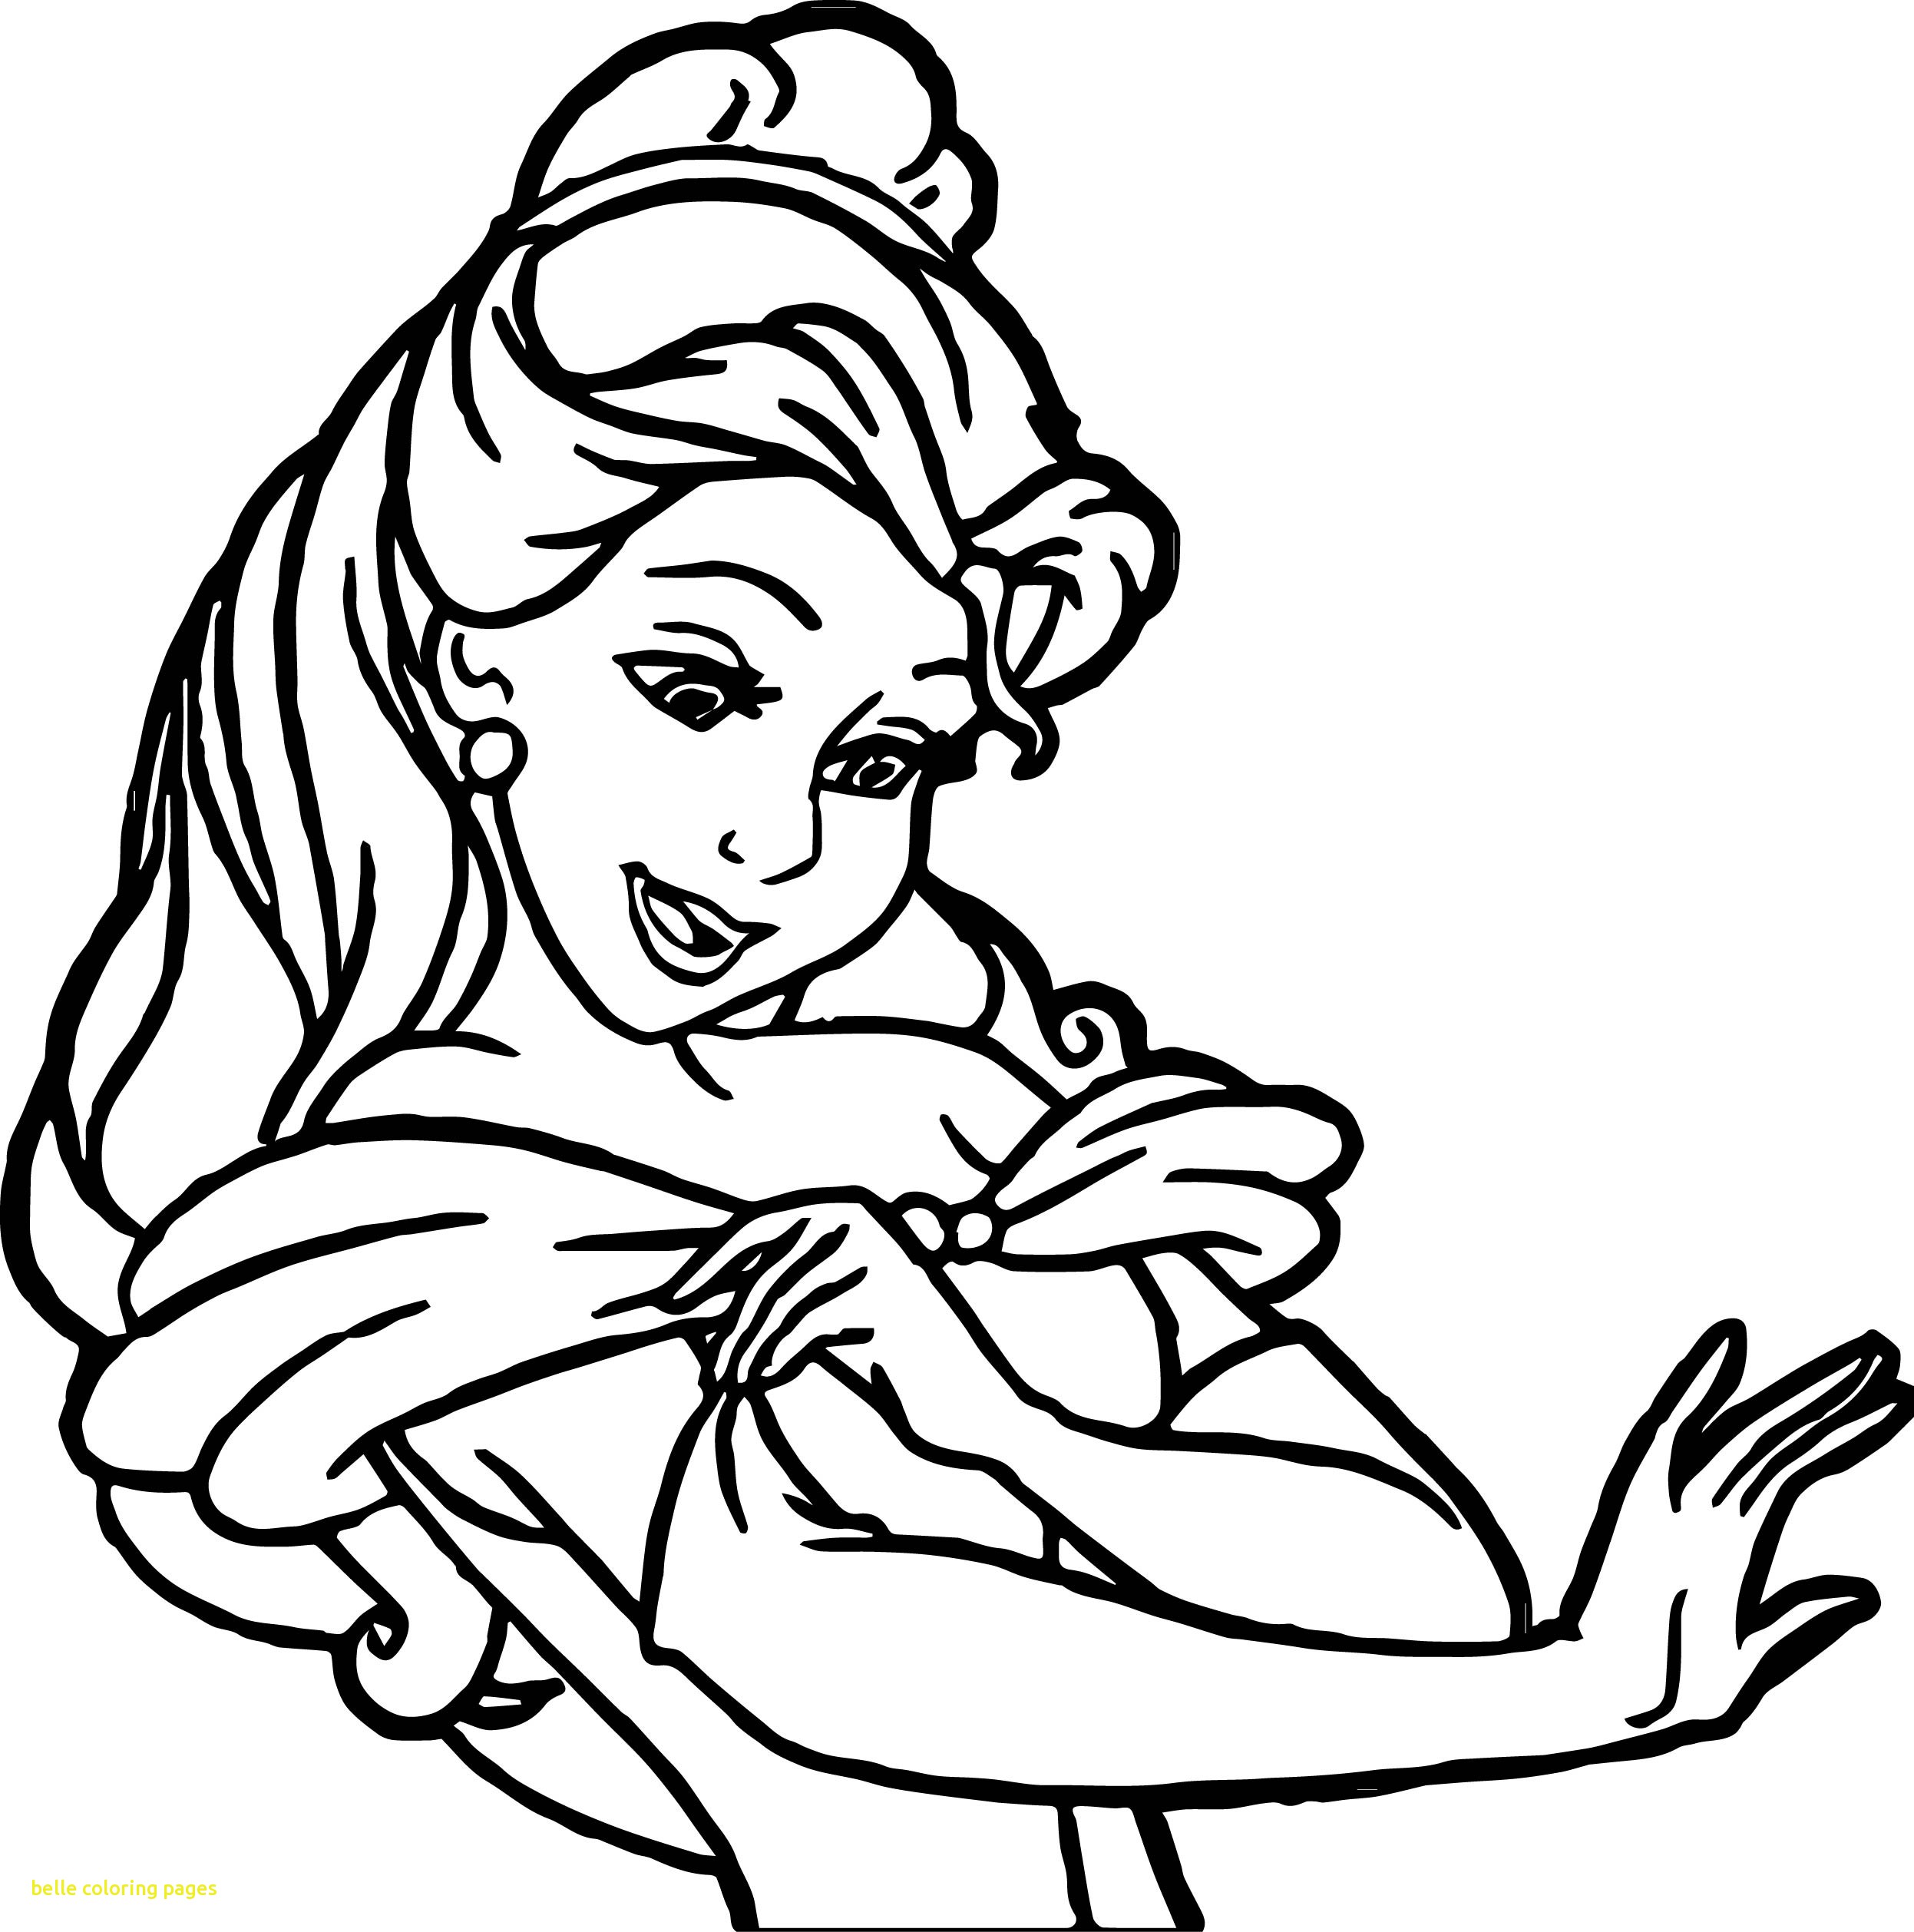 Belle Disney Princess Coloring Pages at GetDrawings.com | Free for